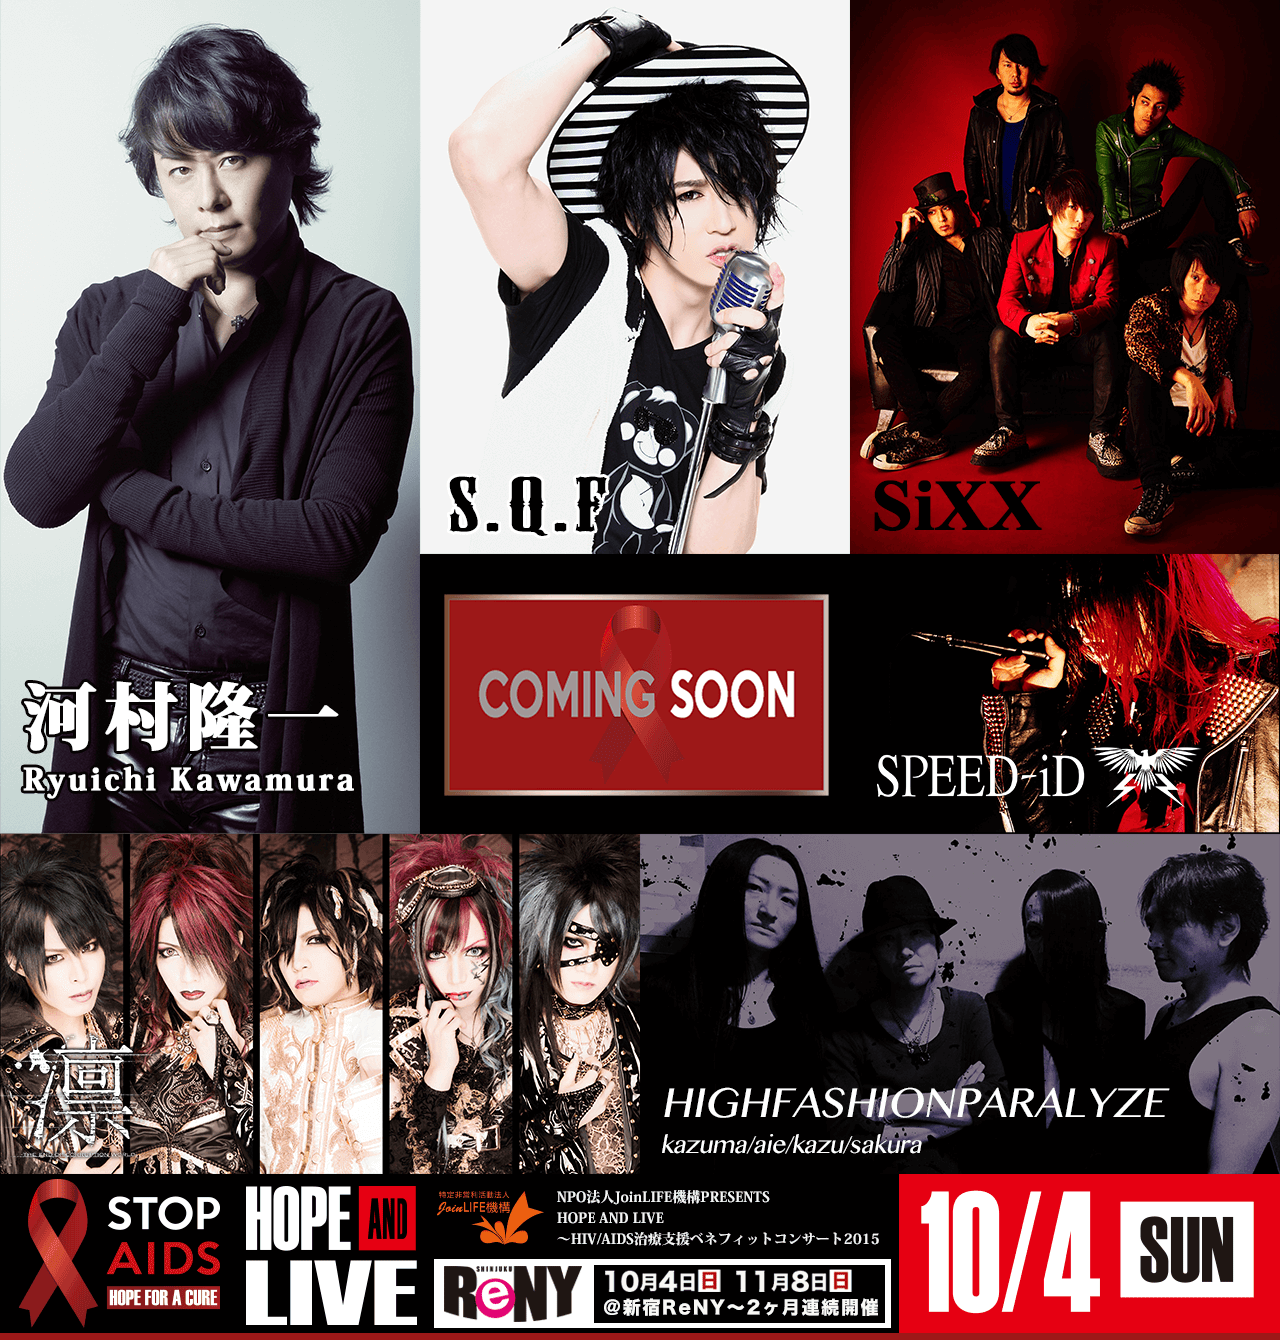 Hope And Live 201510